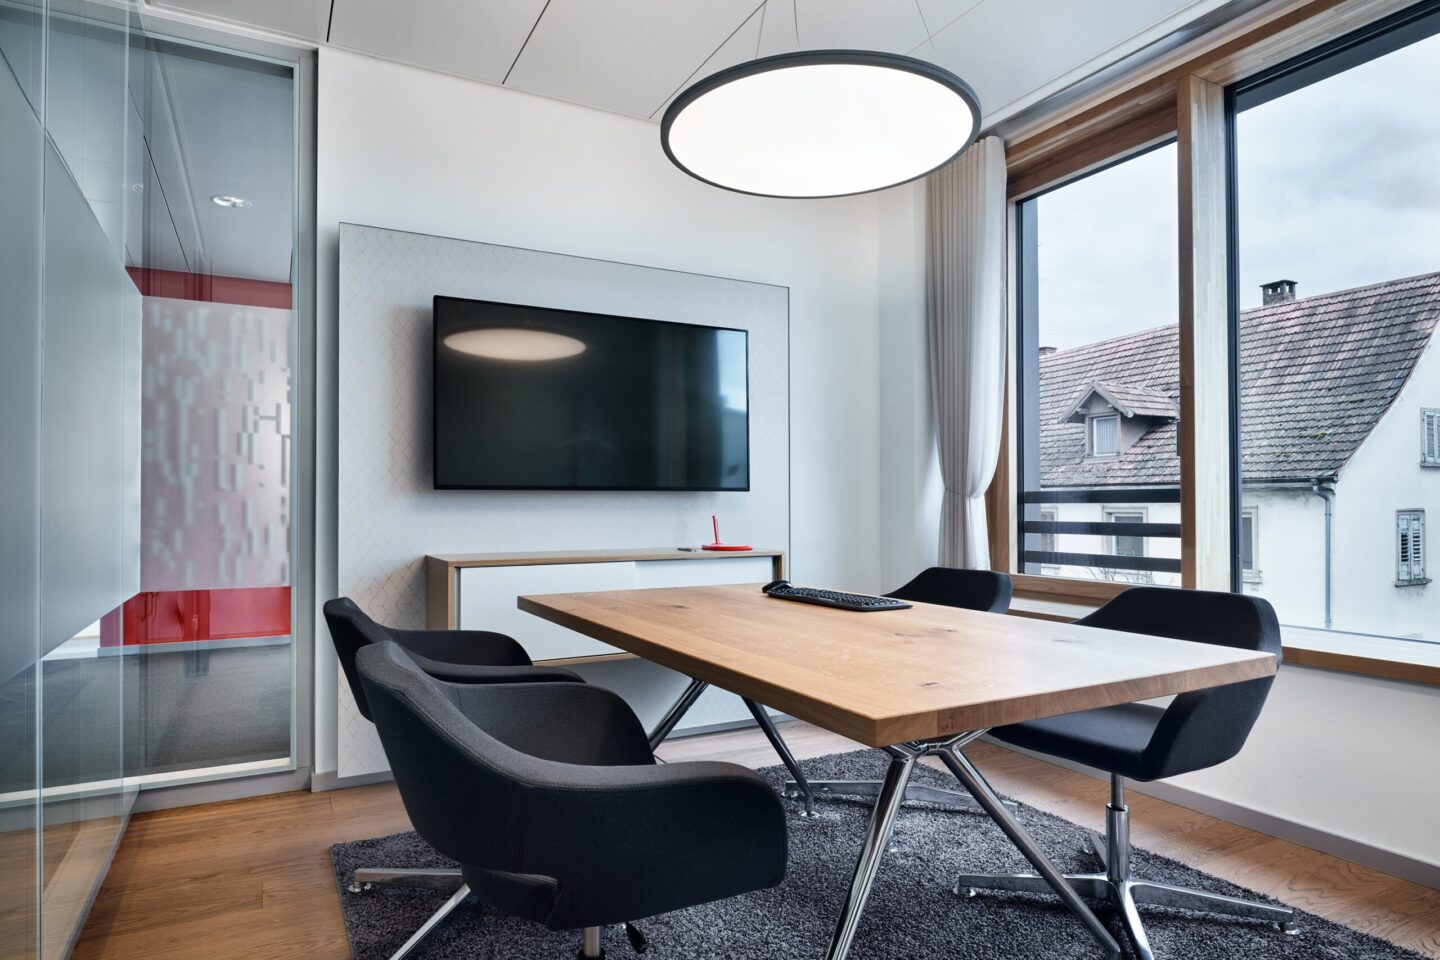 System walls from feco │ Sparkasse Hochrhein │ meeting rooms